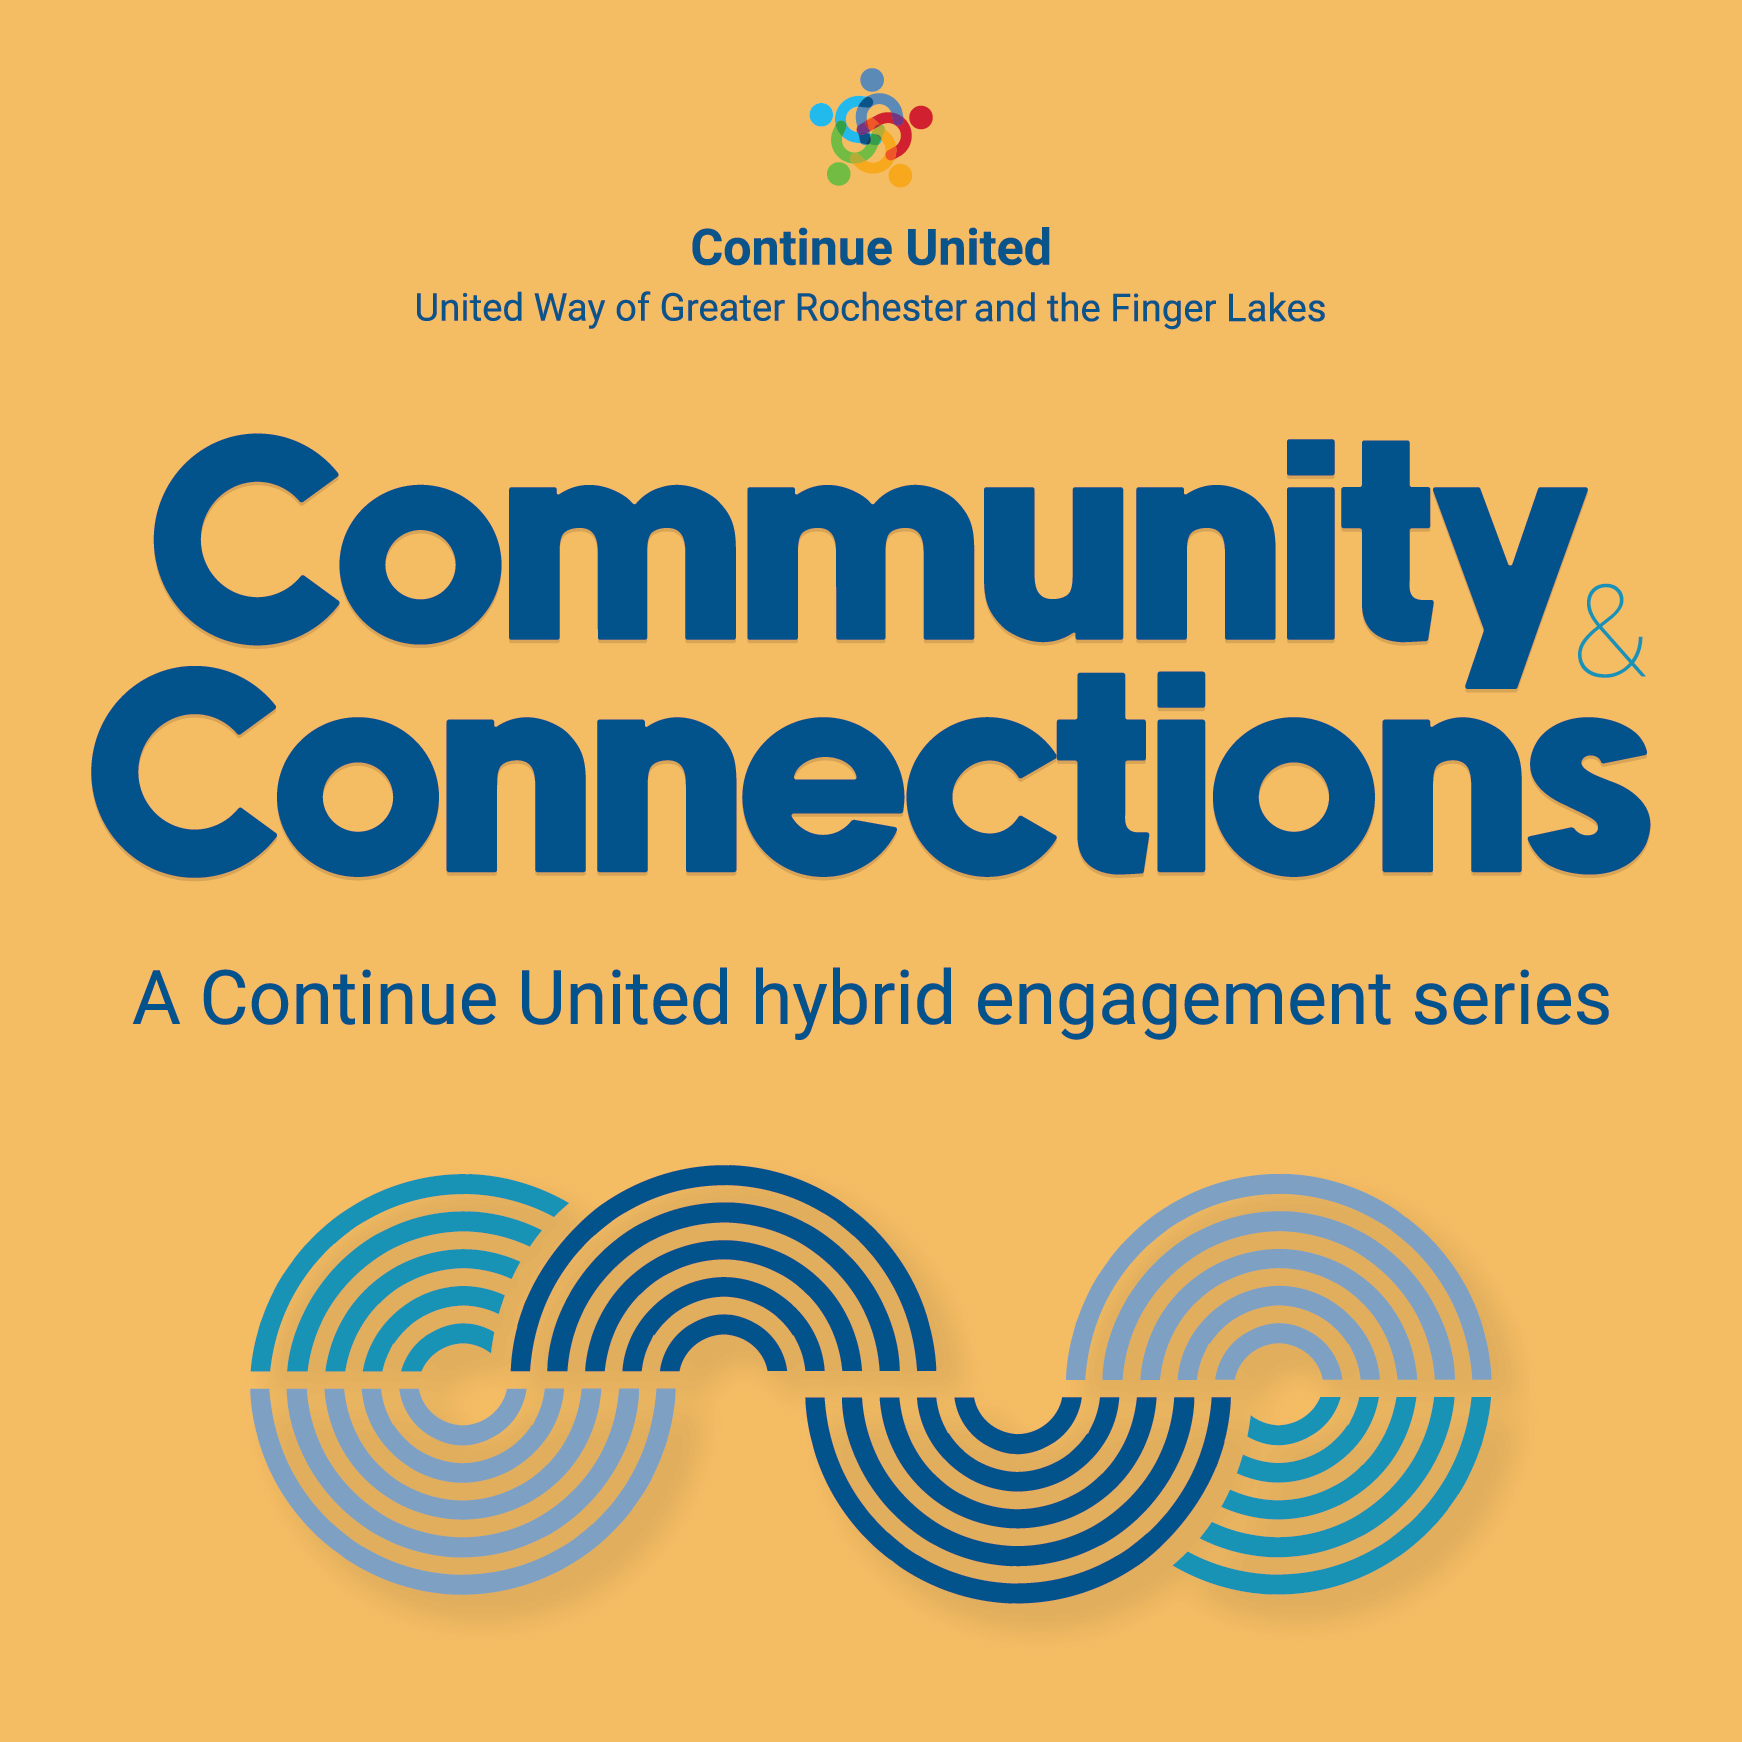 Community & Connections